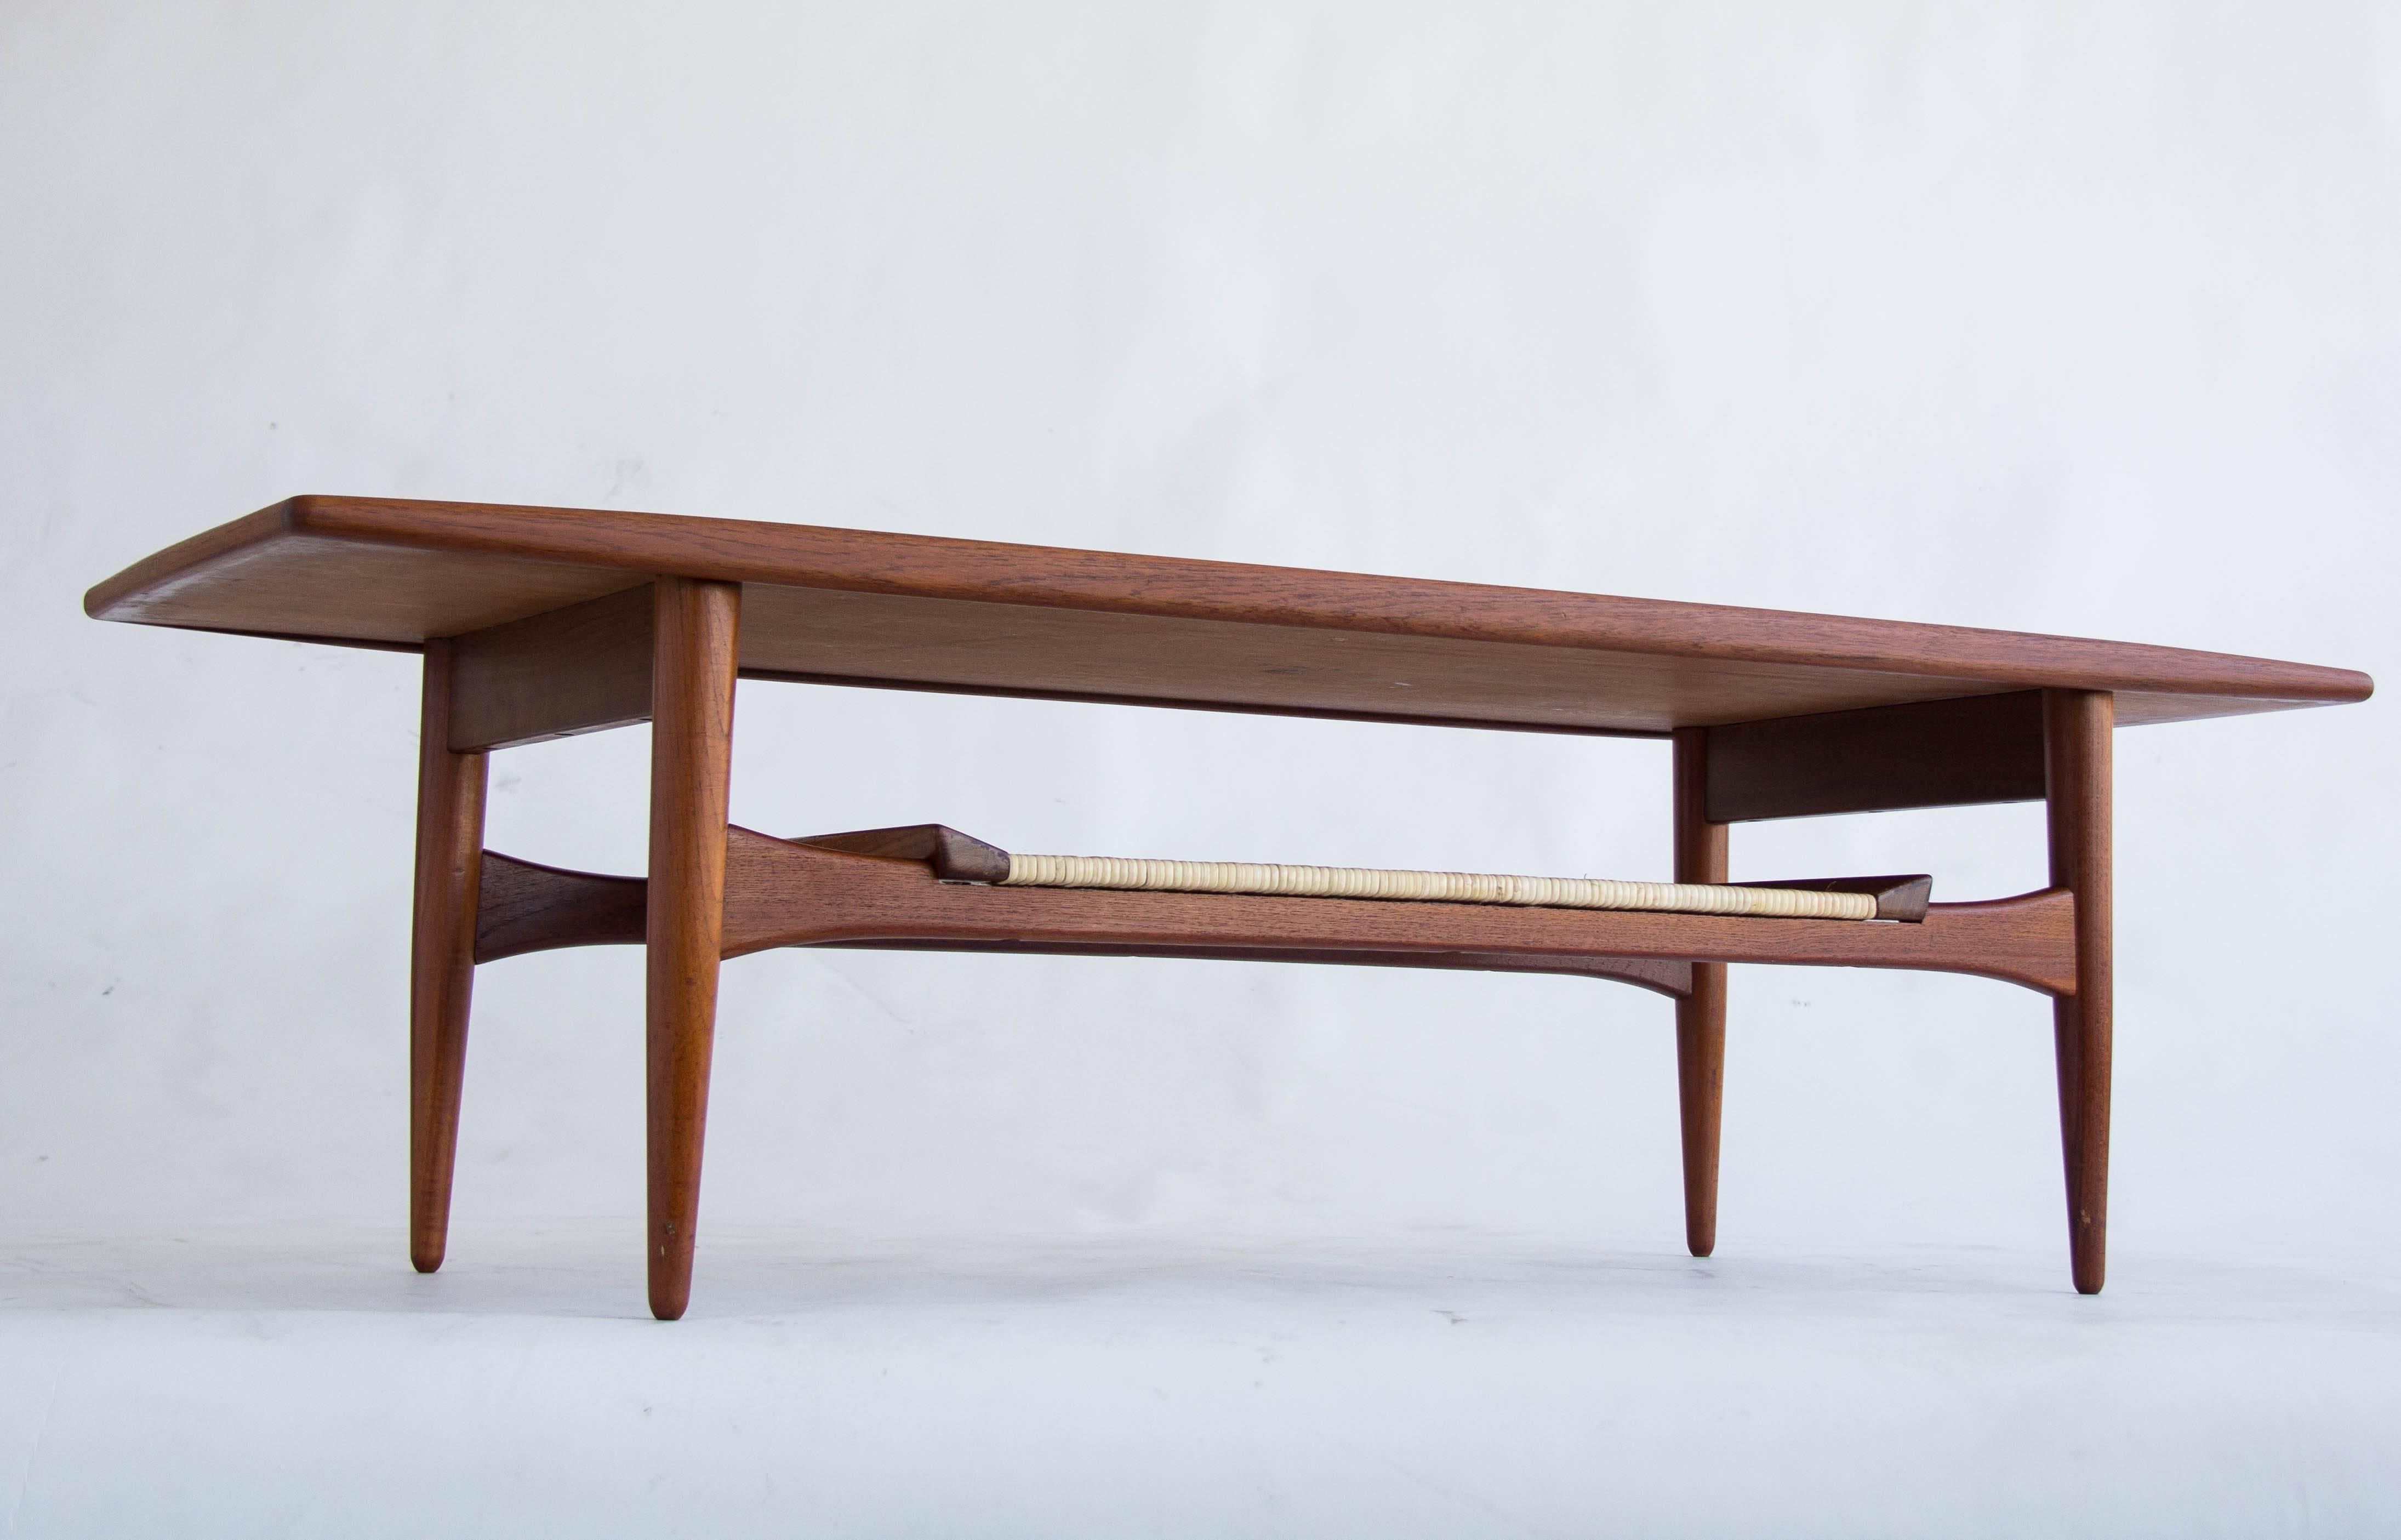 Elegant surfboard-style coffee table manufactured for MM Moreddi of California in the 1960s. The tabletop is teak, with tapered legs, sculpted crossbars, and a woven cane shelf underneath.  

Condition: The table is in great vintage condition, and